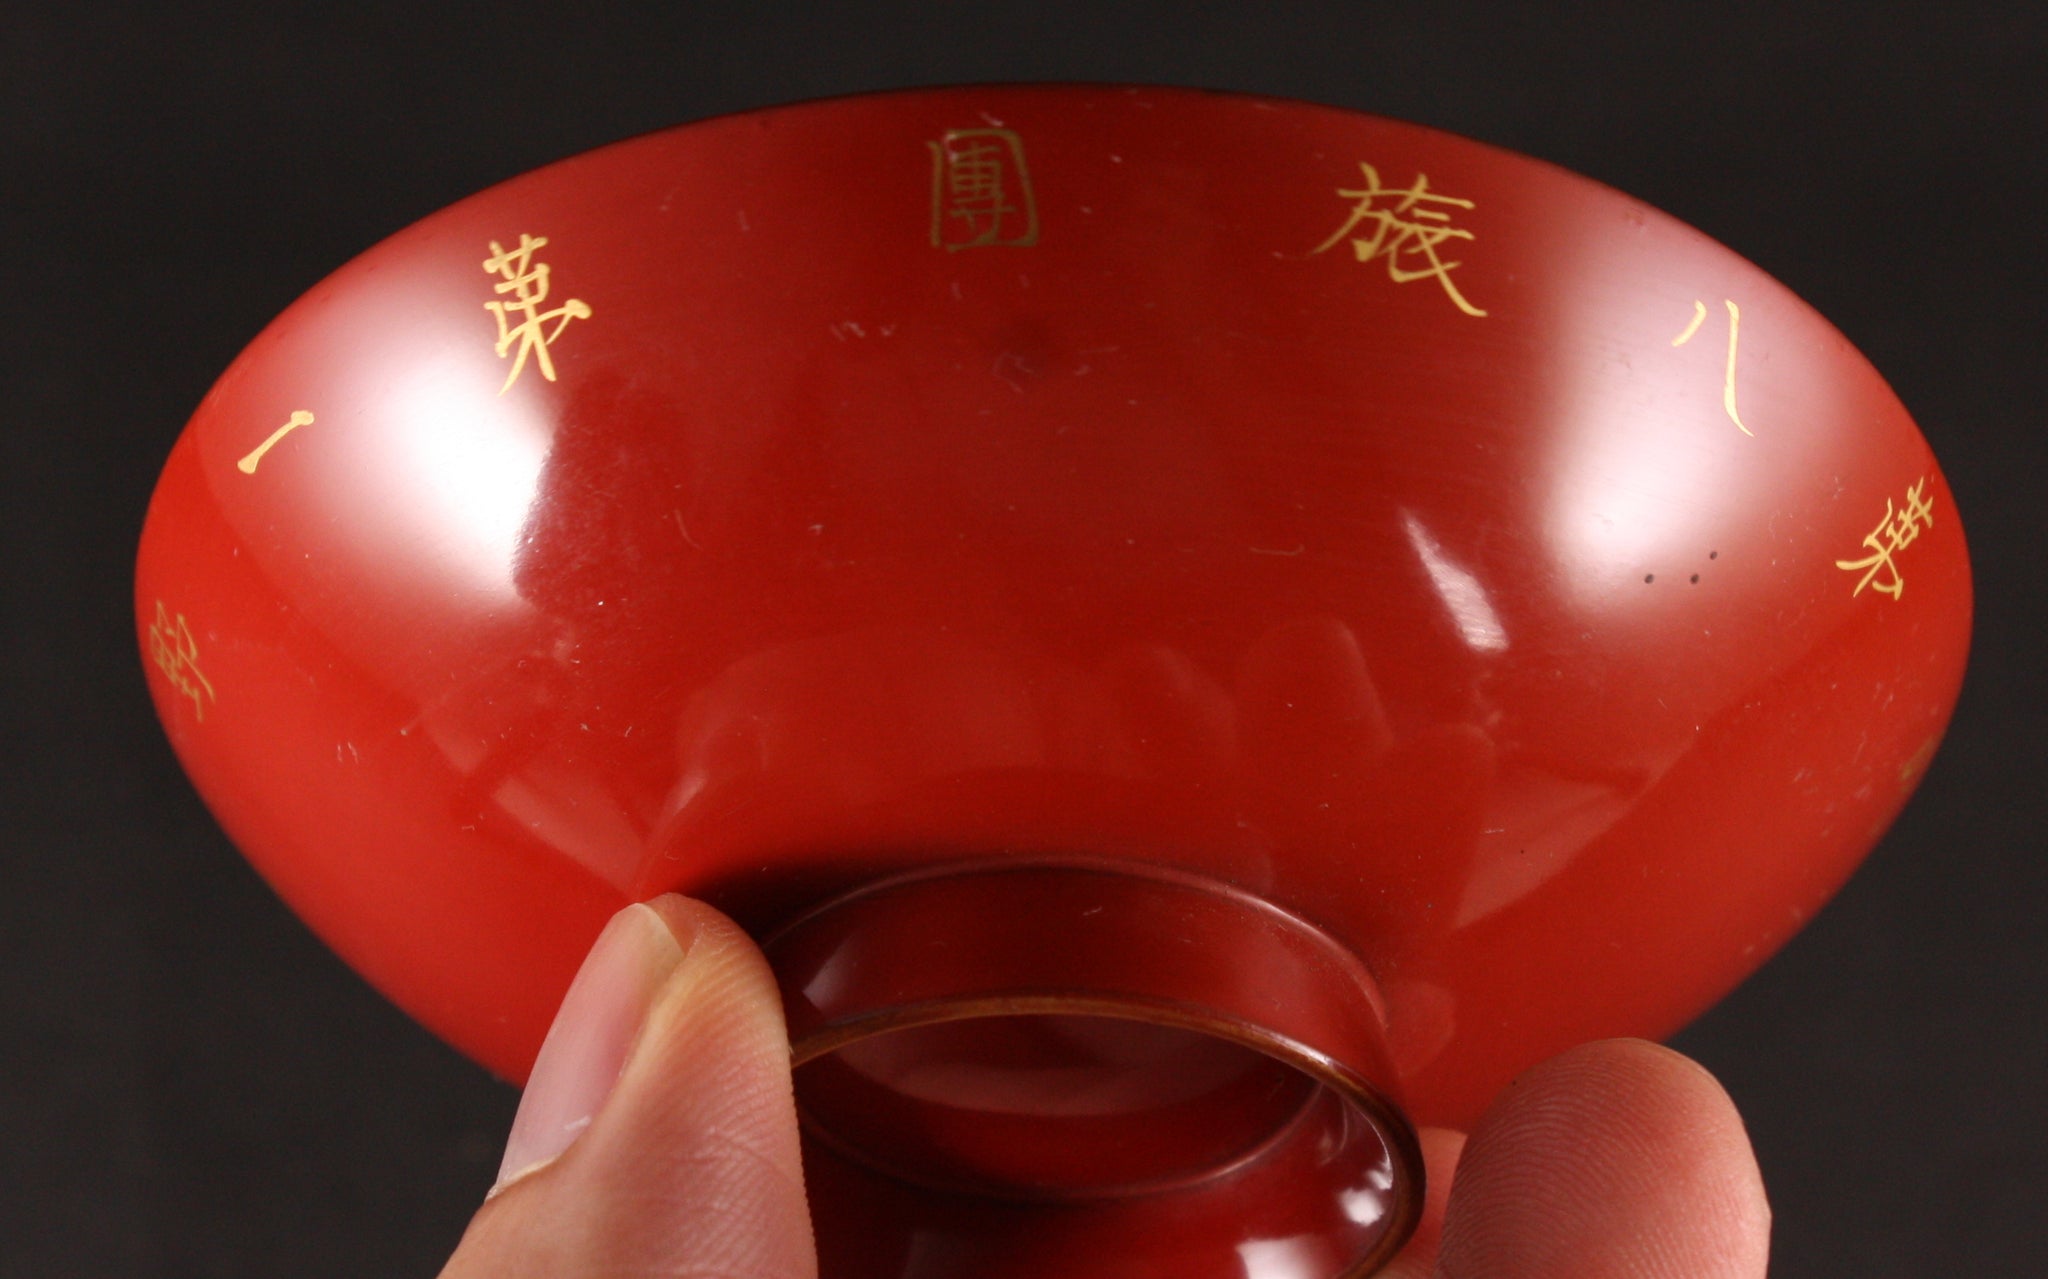 Rare Russo Japanese War Field Hospital Lacquer Army Sake Cup